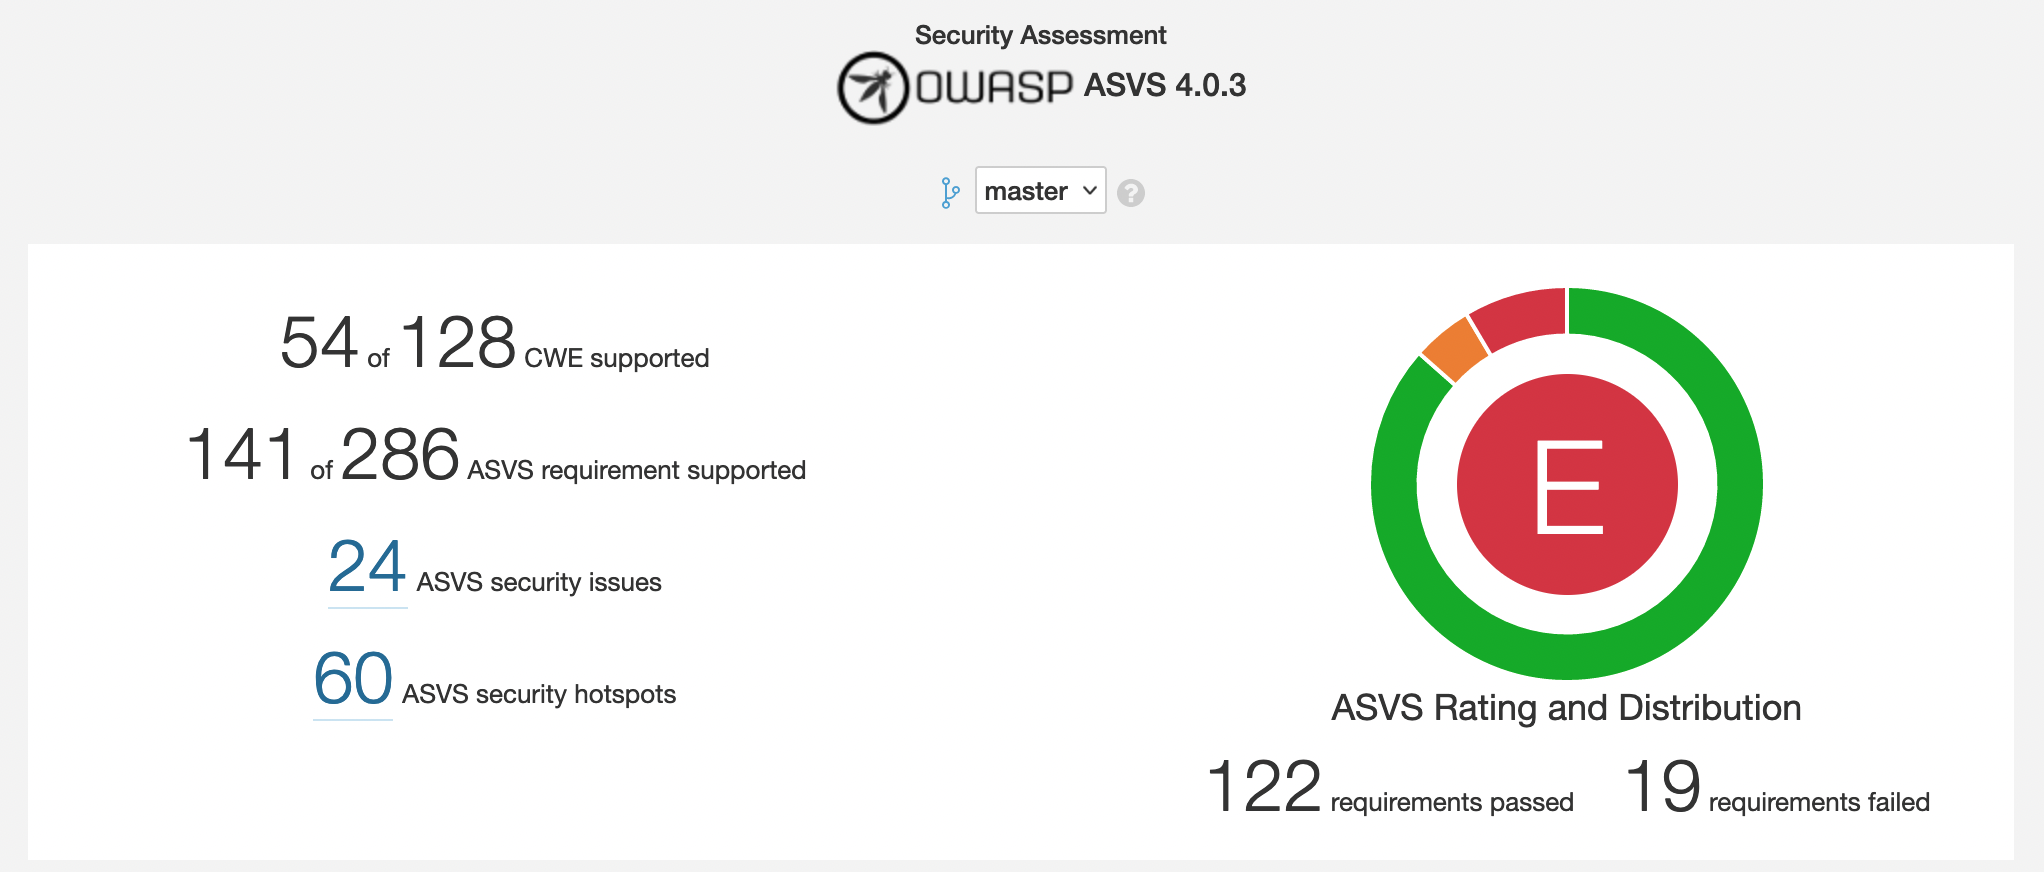 OWASP ASVS Security Assessment Summary with Rating